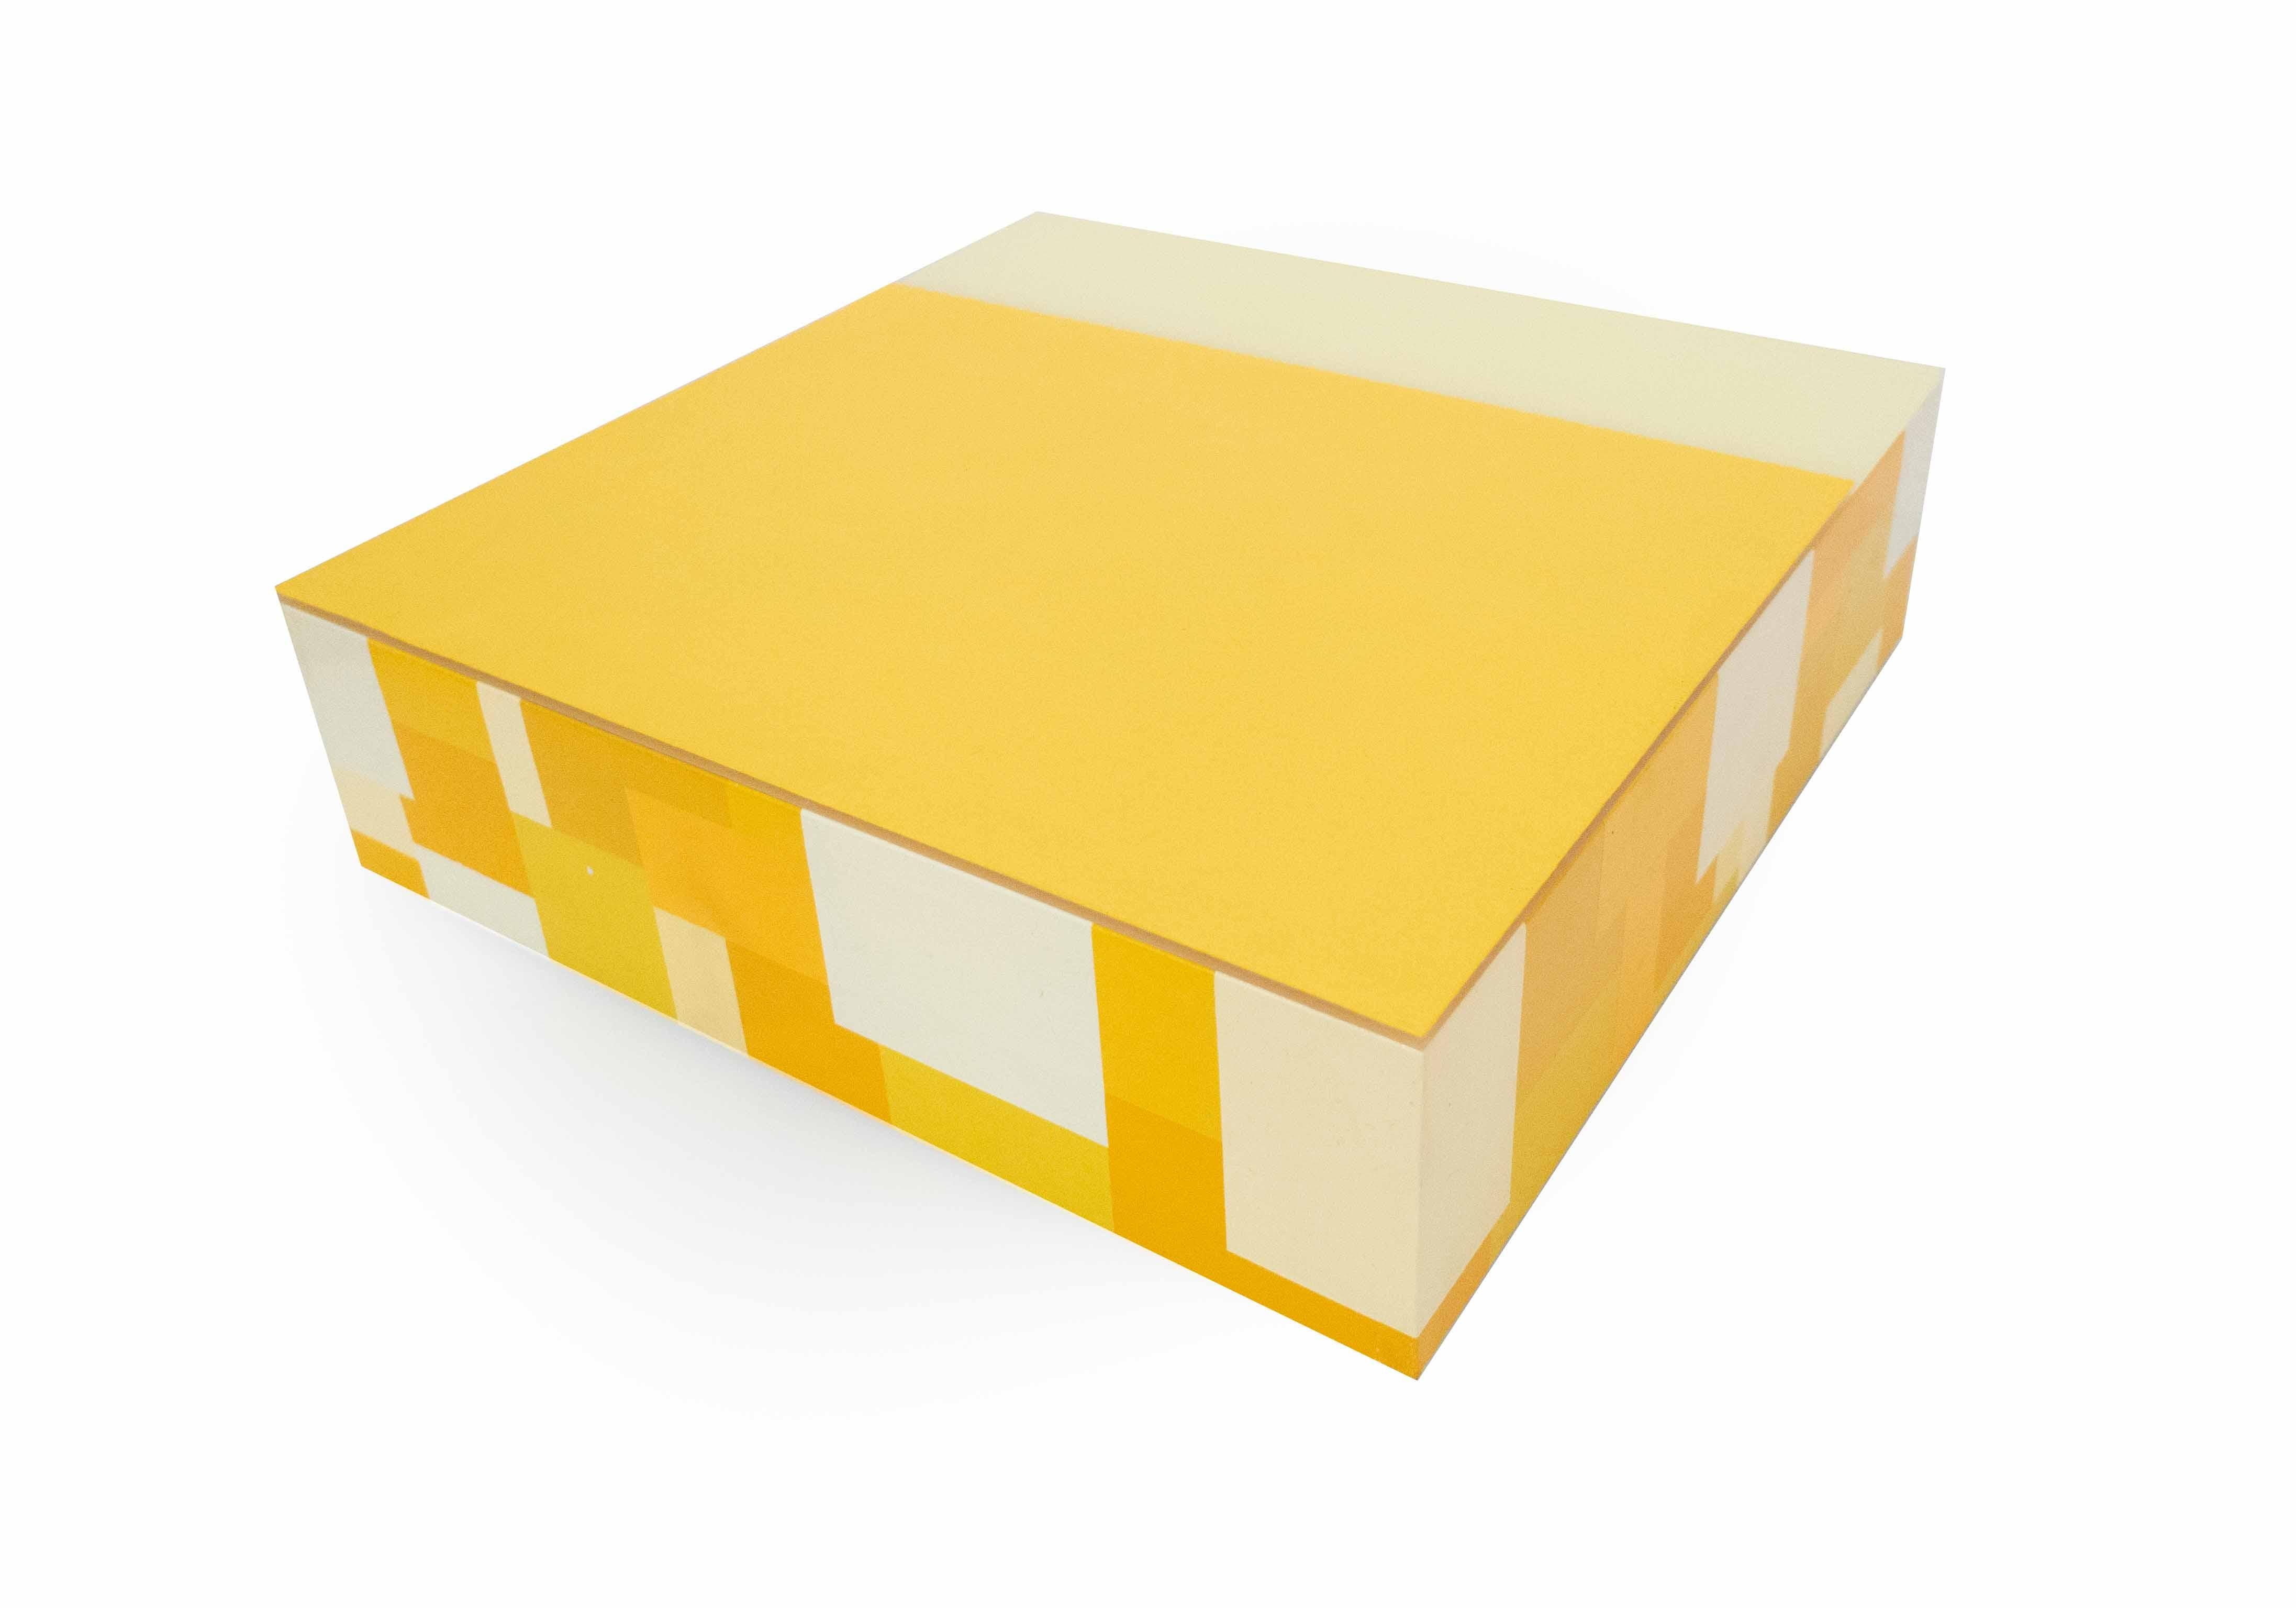 Horizons, 2019, Box, Yellow, mixed media - Painting by Marco Casentini